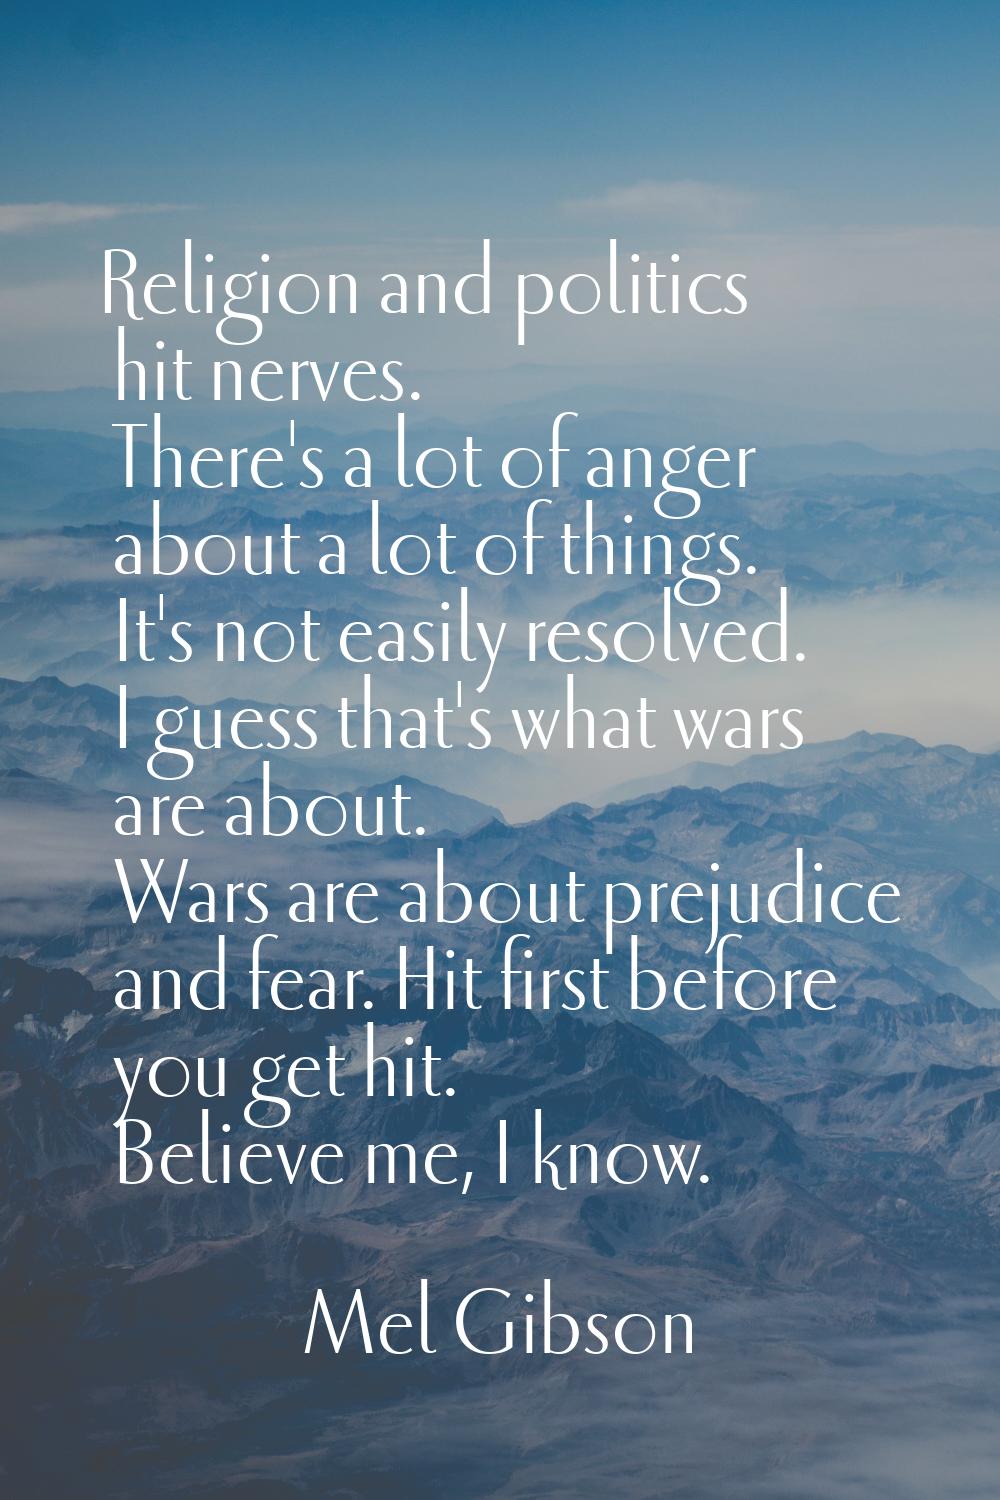 Religion and politics hit nerves. There's a lot of anger about a lot of things. It's not easily res